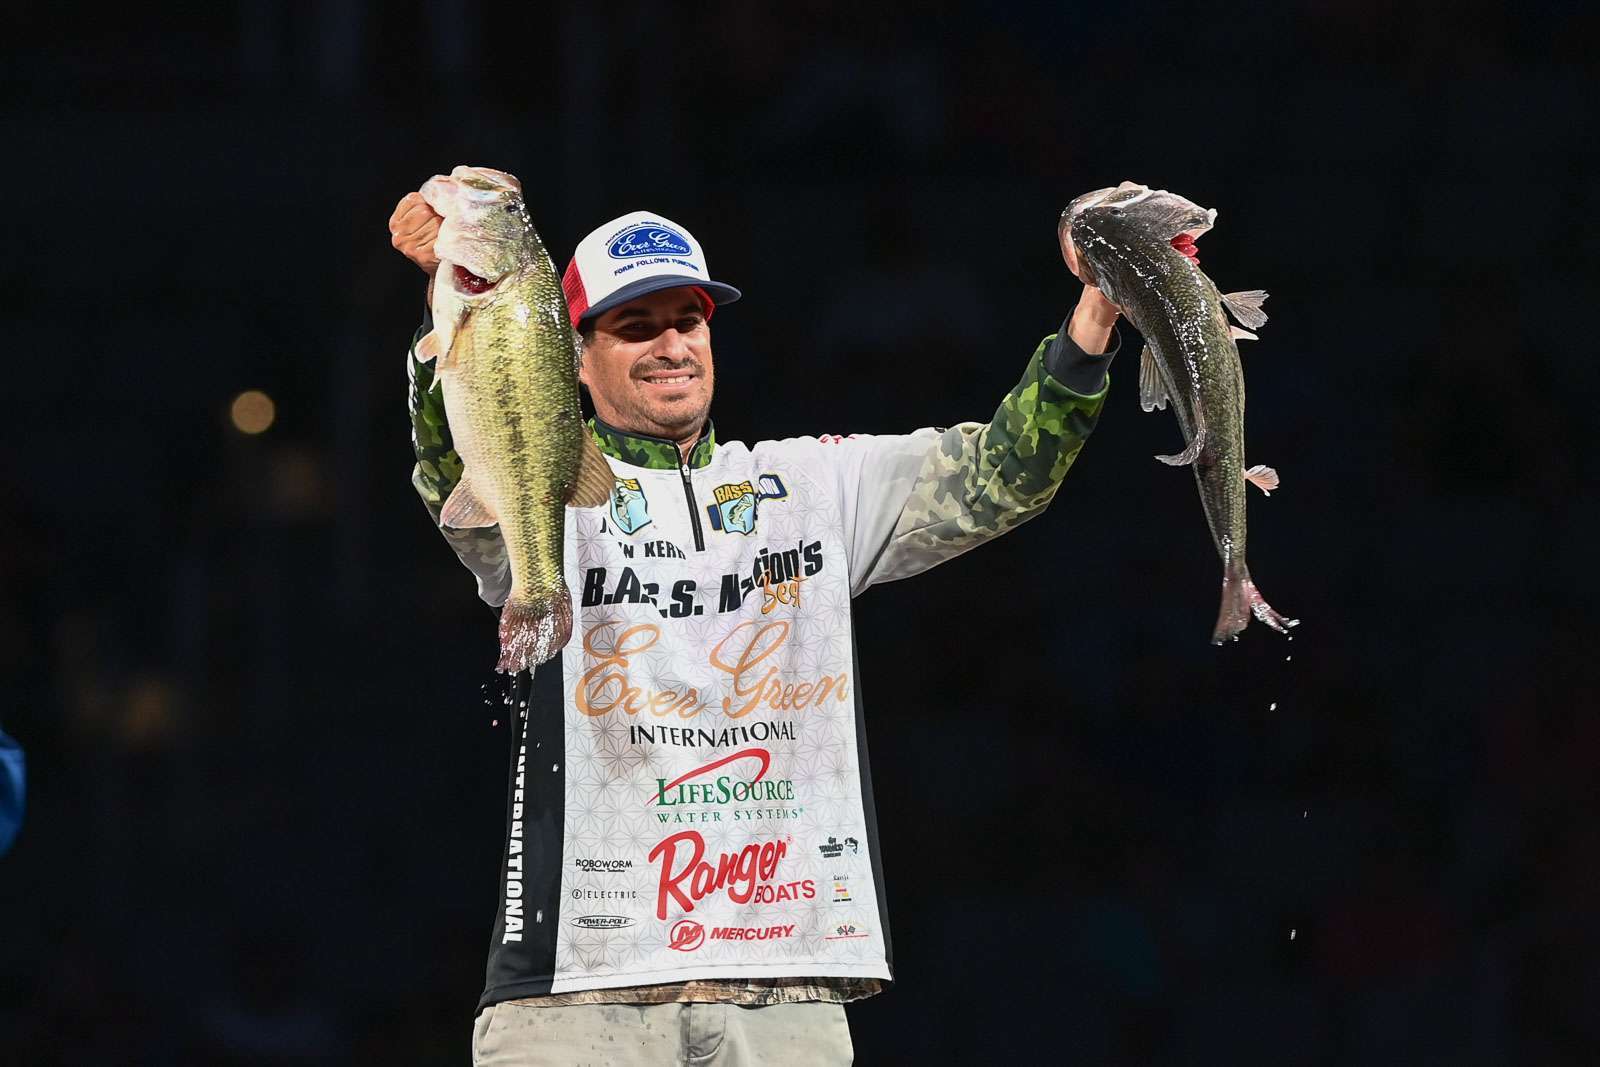 Justin Kerr of Lake Havasu, Ariz., represented the B.A.S.S. Nation well as he came in with the biggest bag on Day 2.  The bulk of Kerrâs 19-12 came from a 6-12 and a 7-2 that moved him up from 22nd to second. His big move elicited comparisons to the only Nation angler to ever win a Classic, Bryan Kerchal.